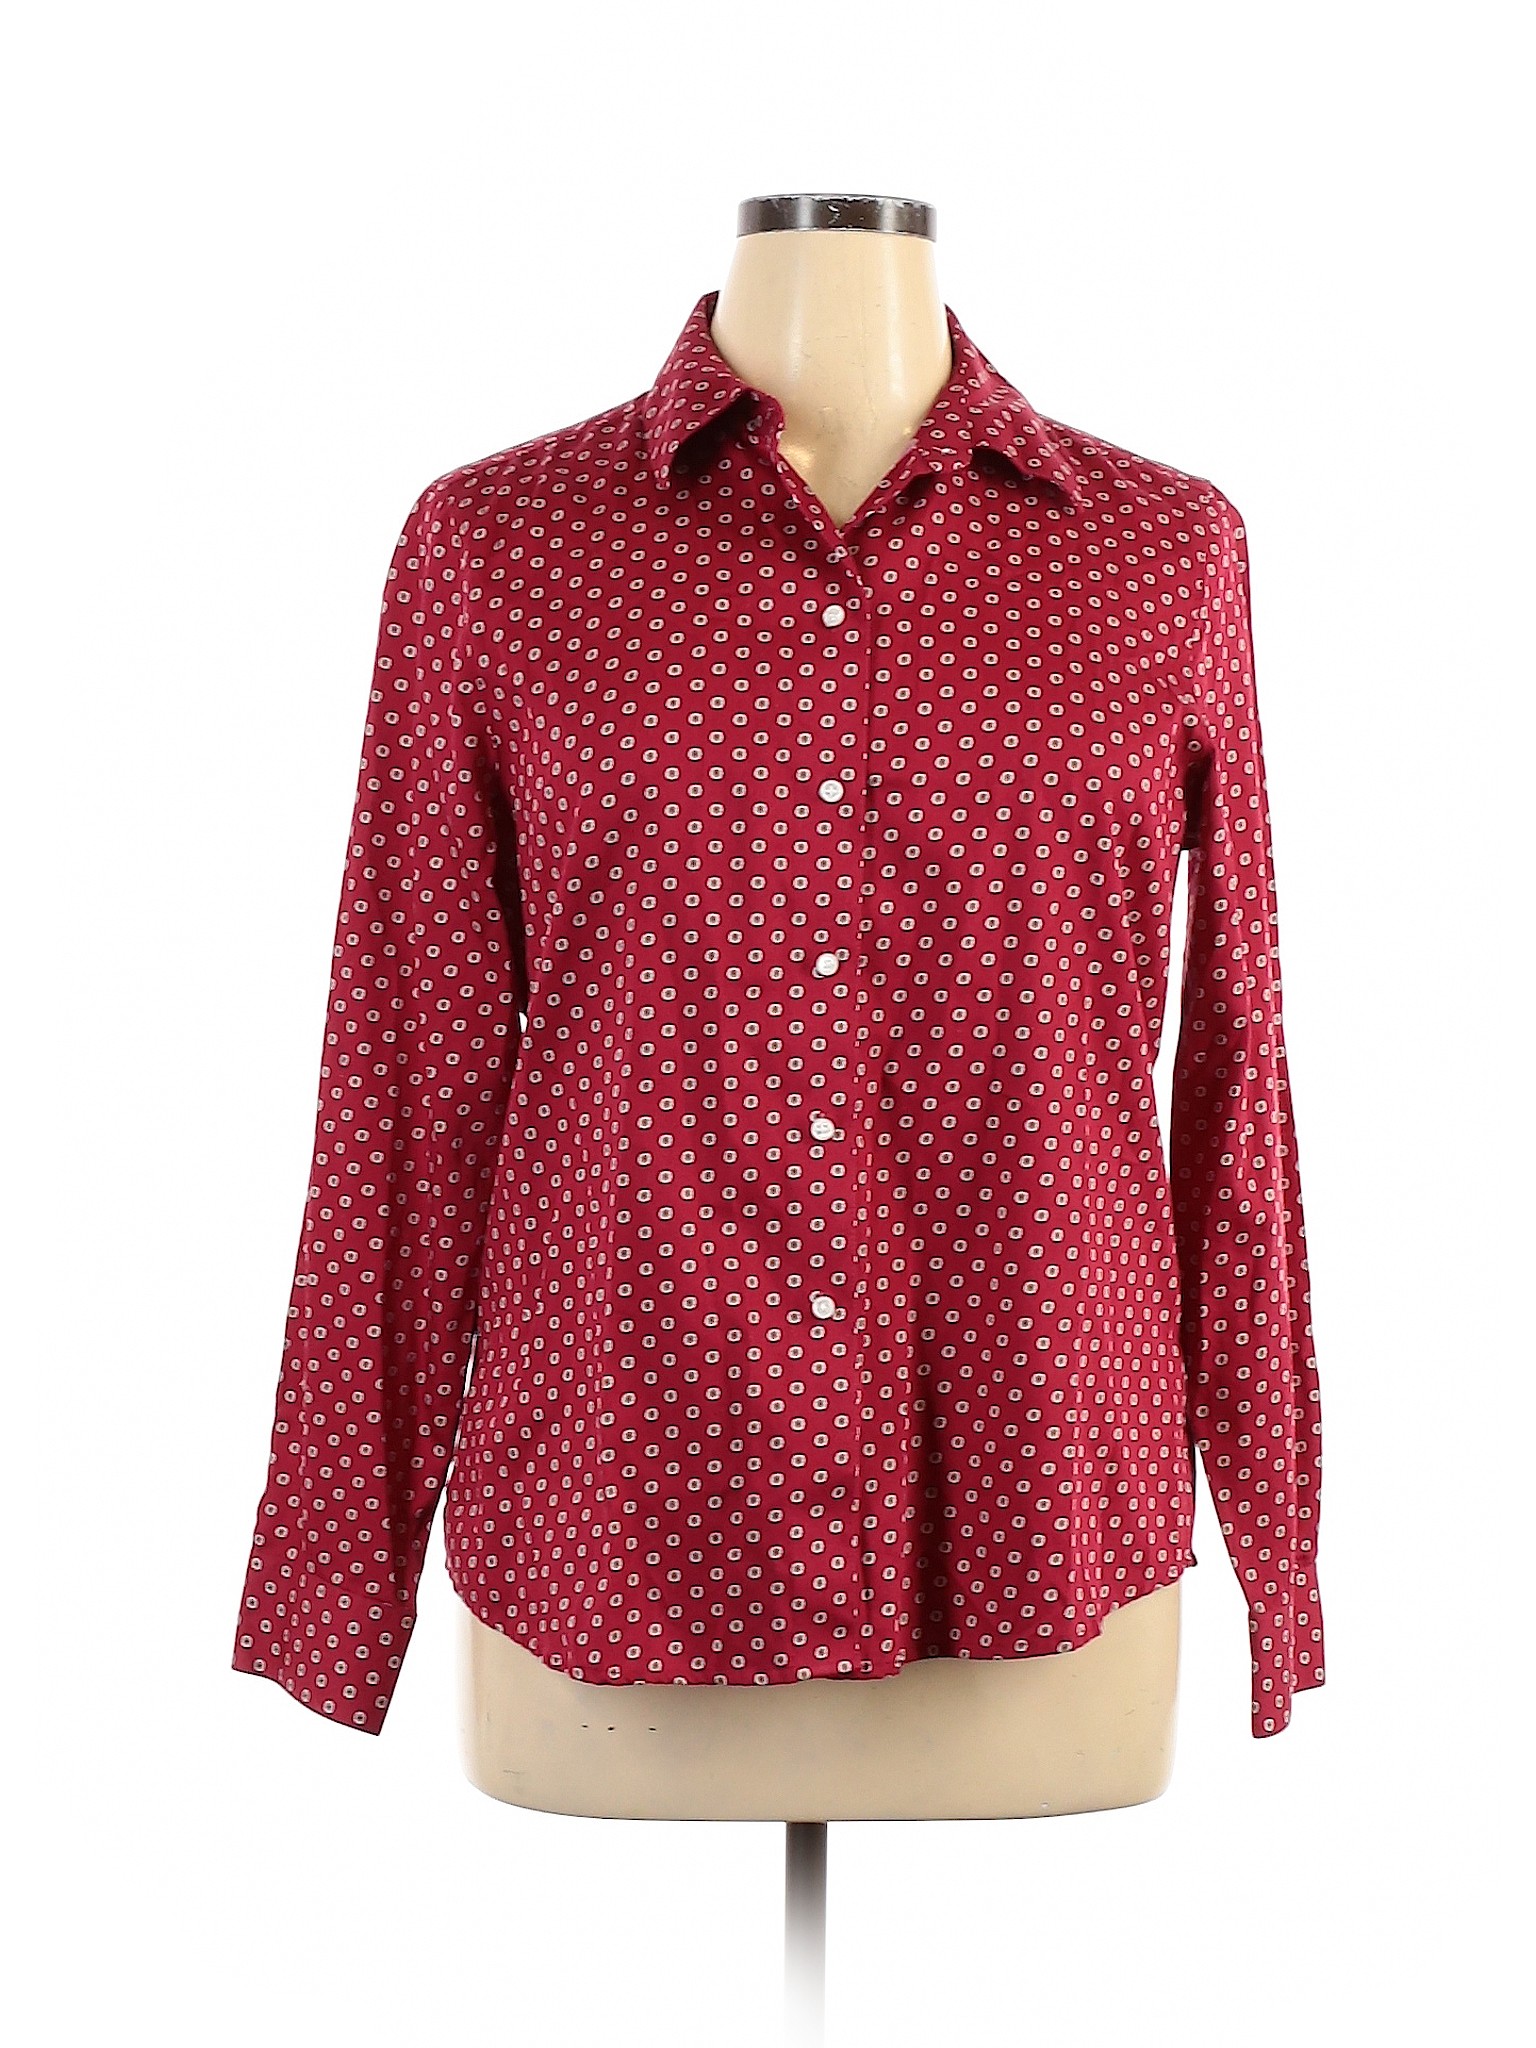 Foxcroft 100% Cotton Polka Dots Red Long Sleeve Button-Down Shirt Size ...